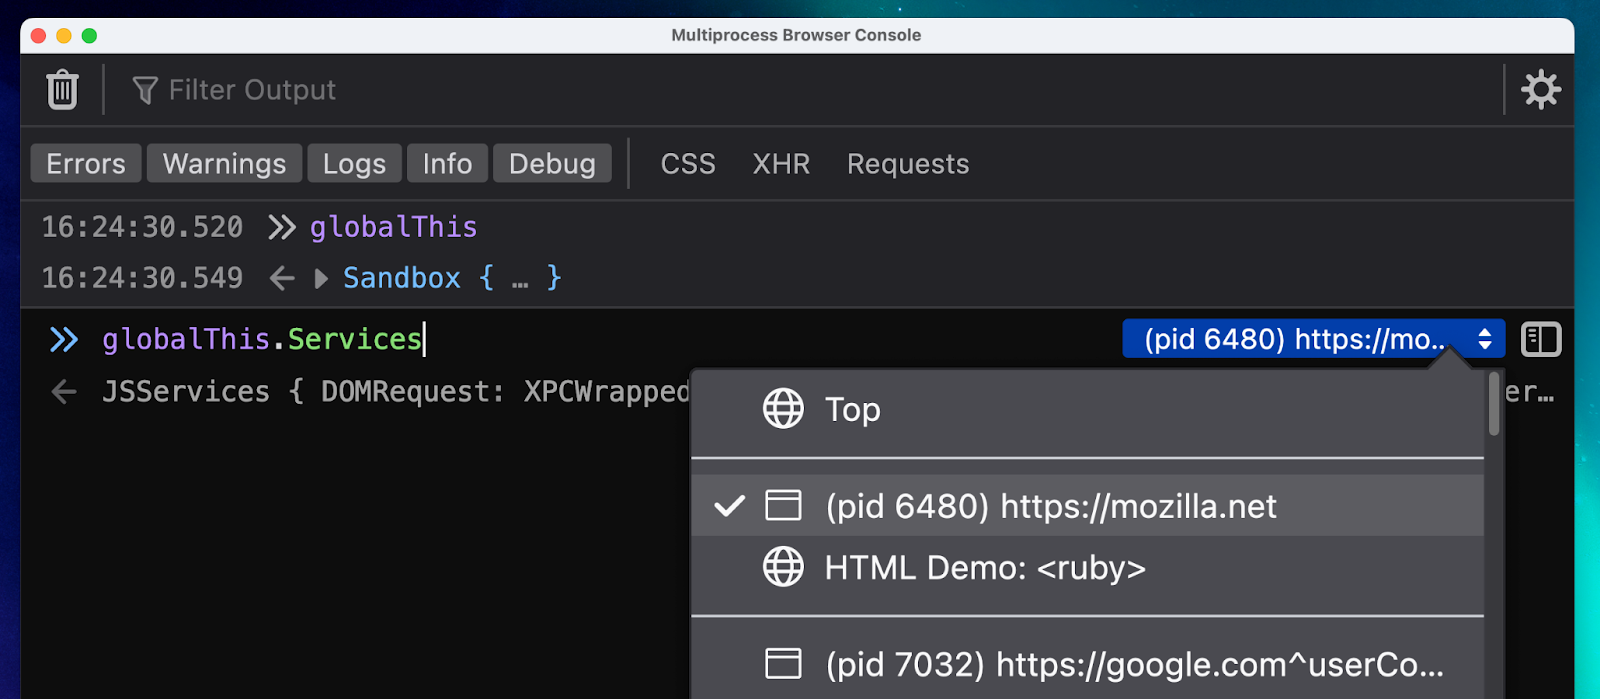 A new dropdown is shown inside of the Browser Console which is open. It shows a panel showing the different frames and processes that the console can target.